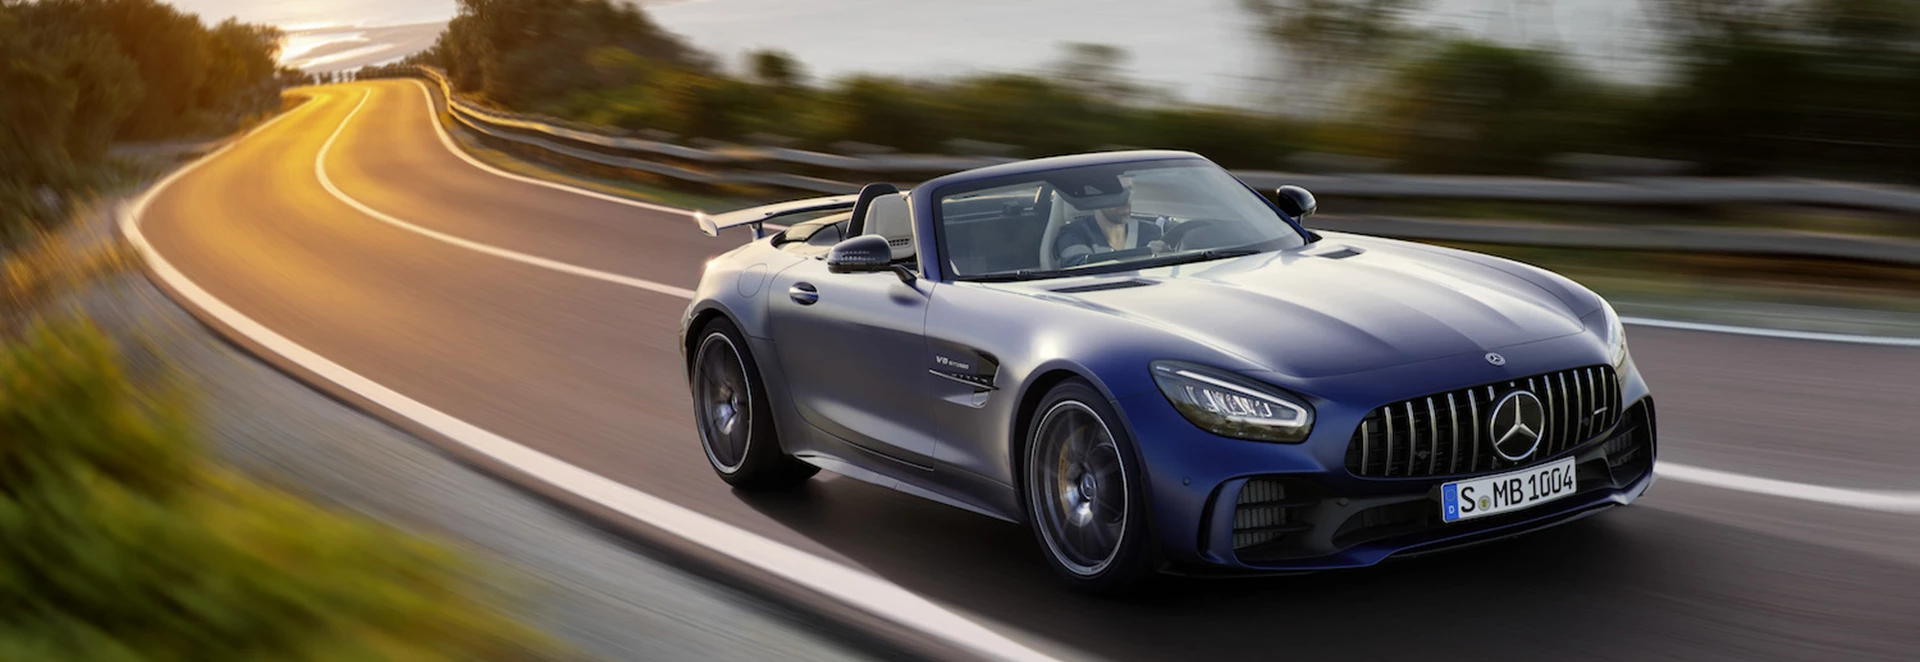 Covers taken off limited-run Mercedes-Benz GT R Roadster